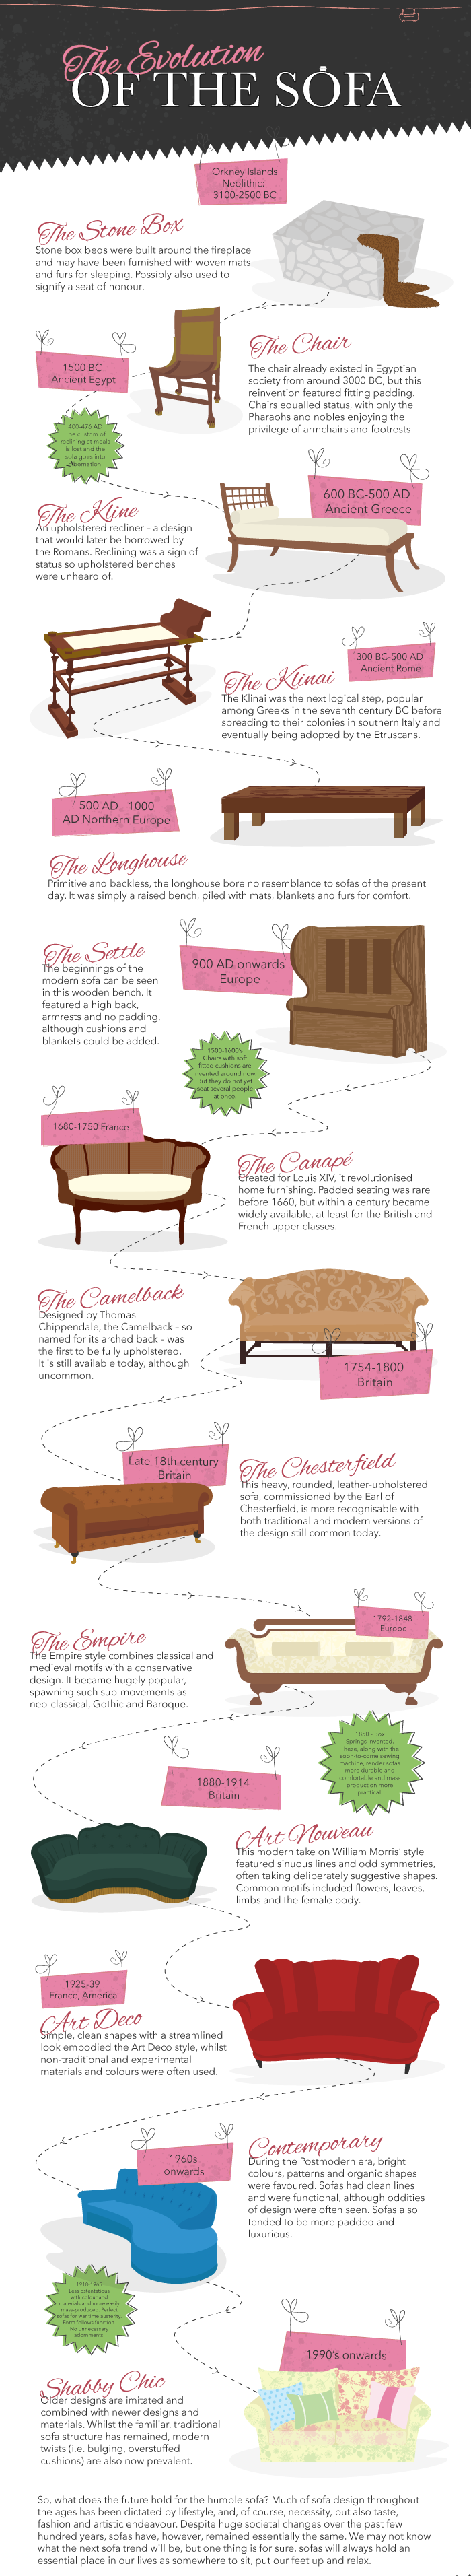 The Evolution of the Sofa by Sofa Workshop